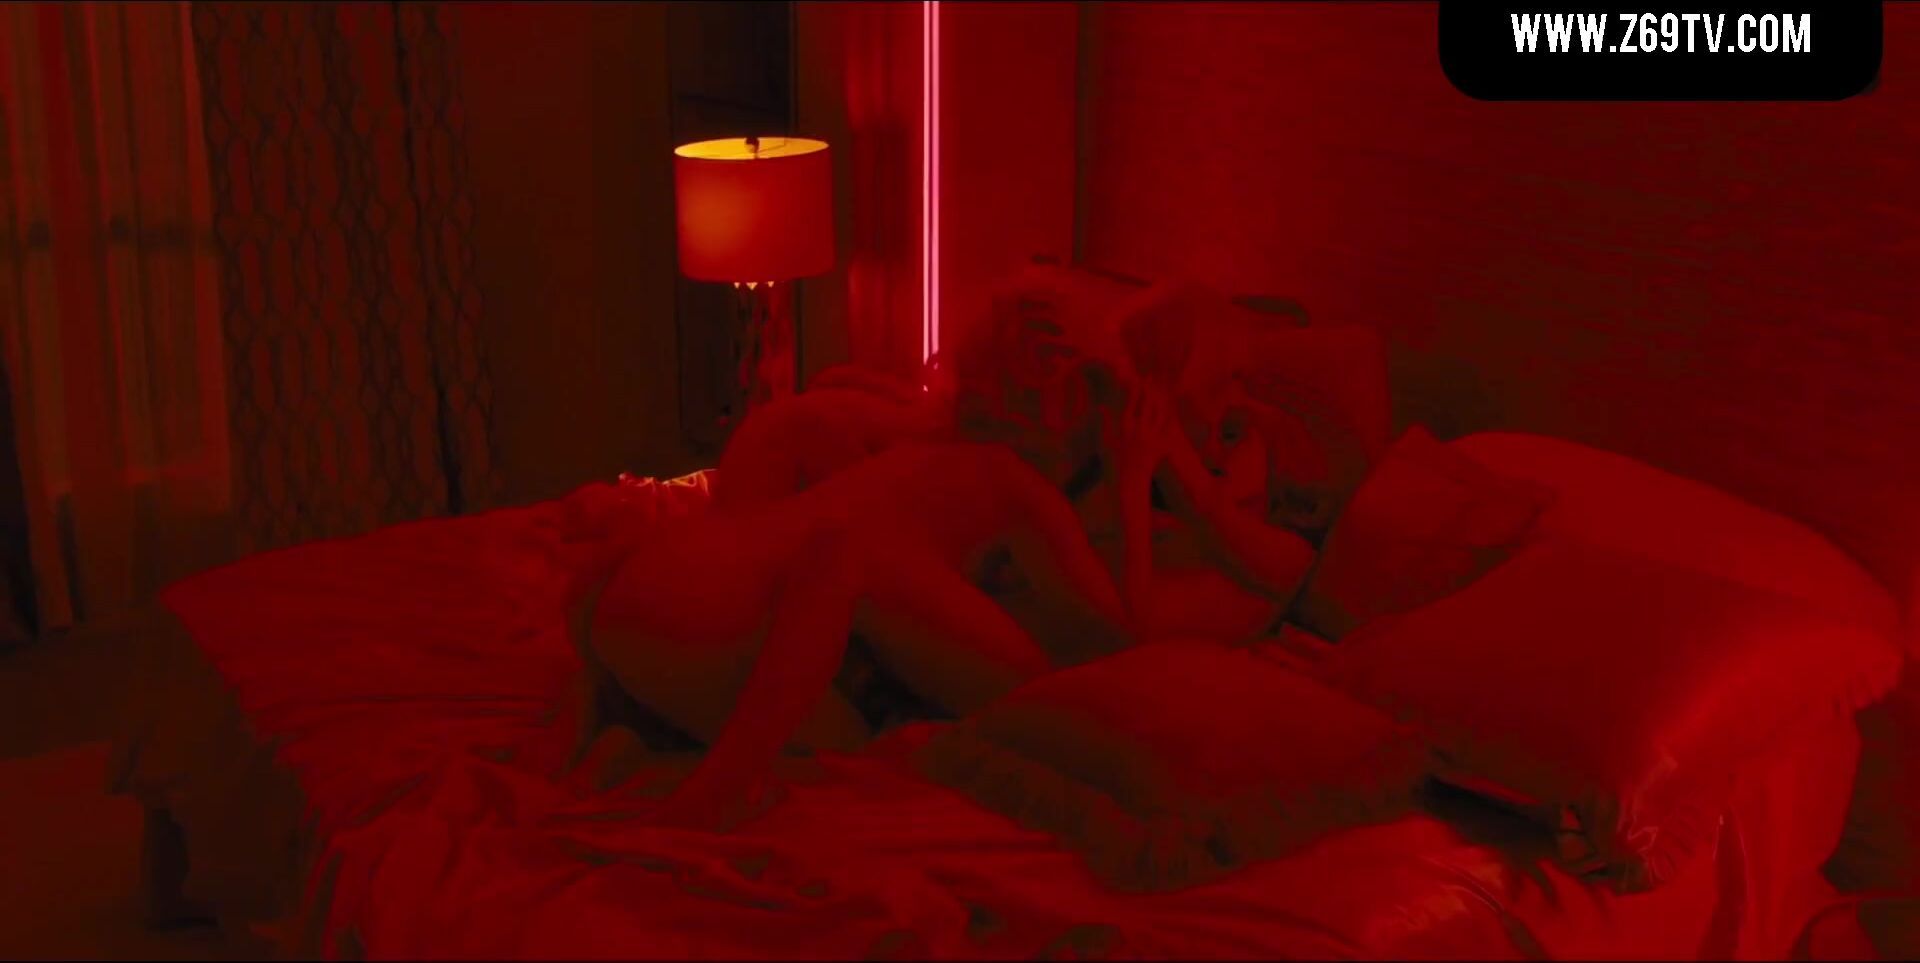 Amatuer Porn Jett from self-titled TV series watches three blondes having lesbian sex in bed Gay Interracial - 2